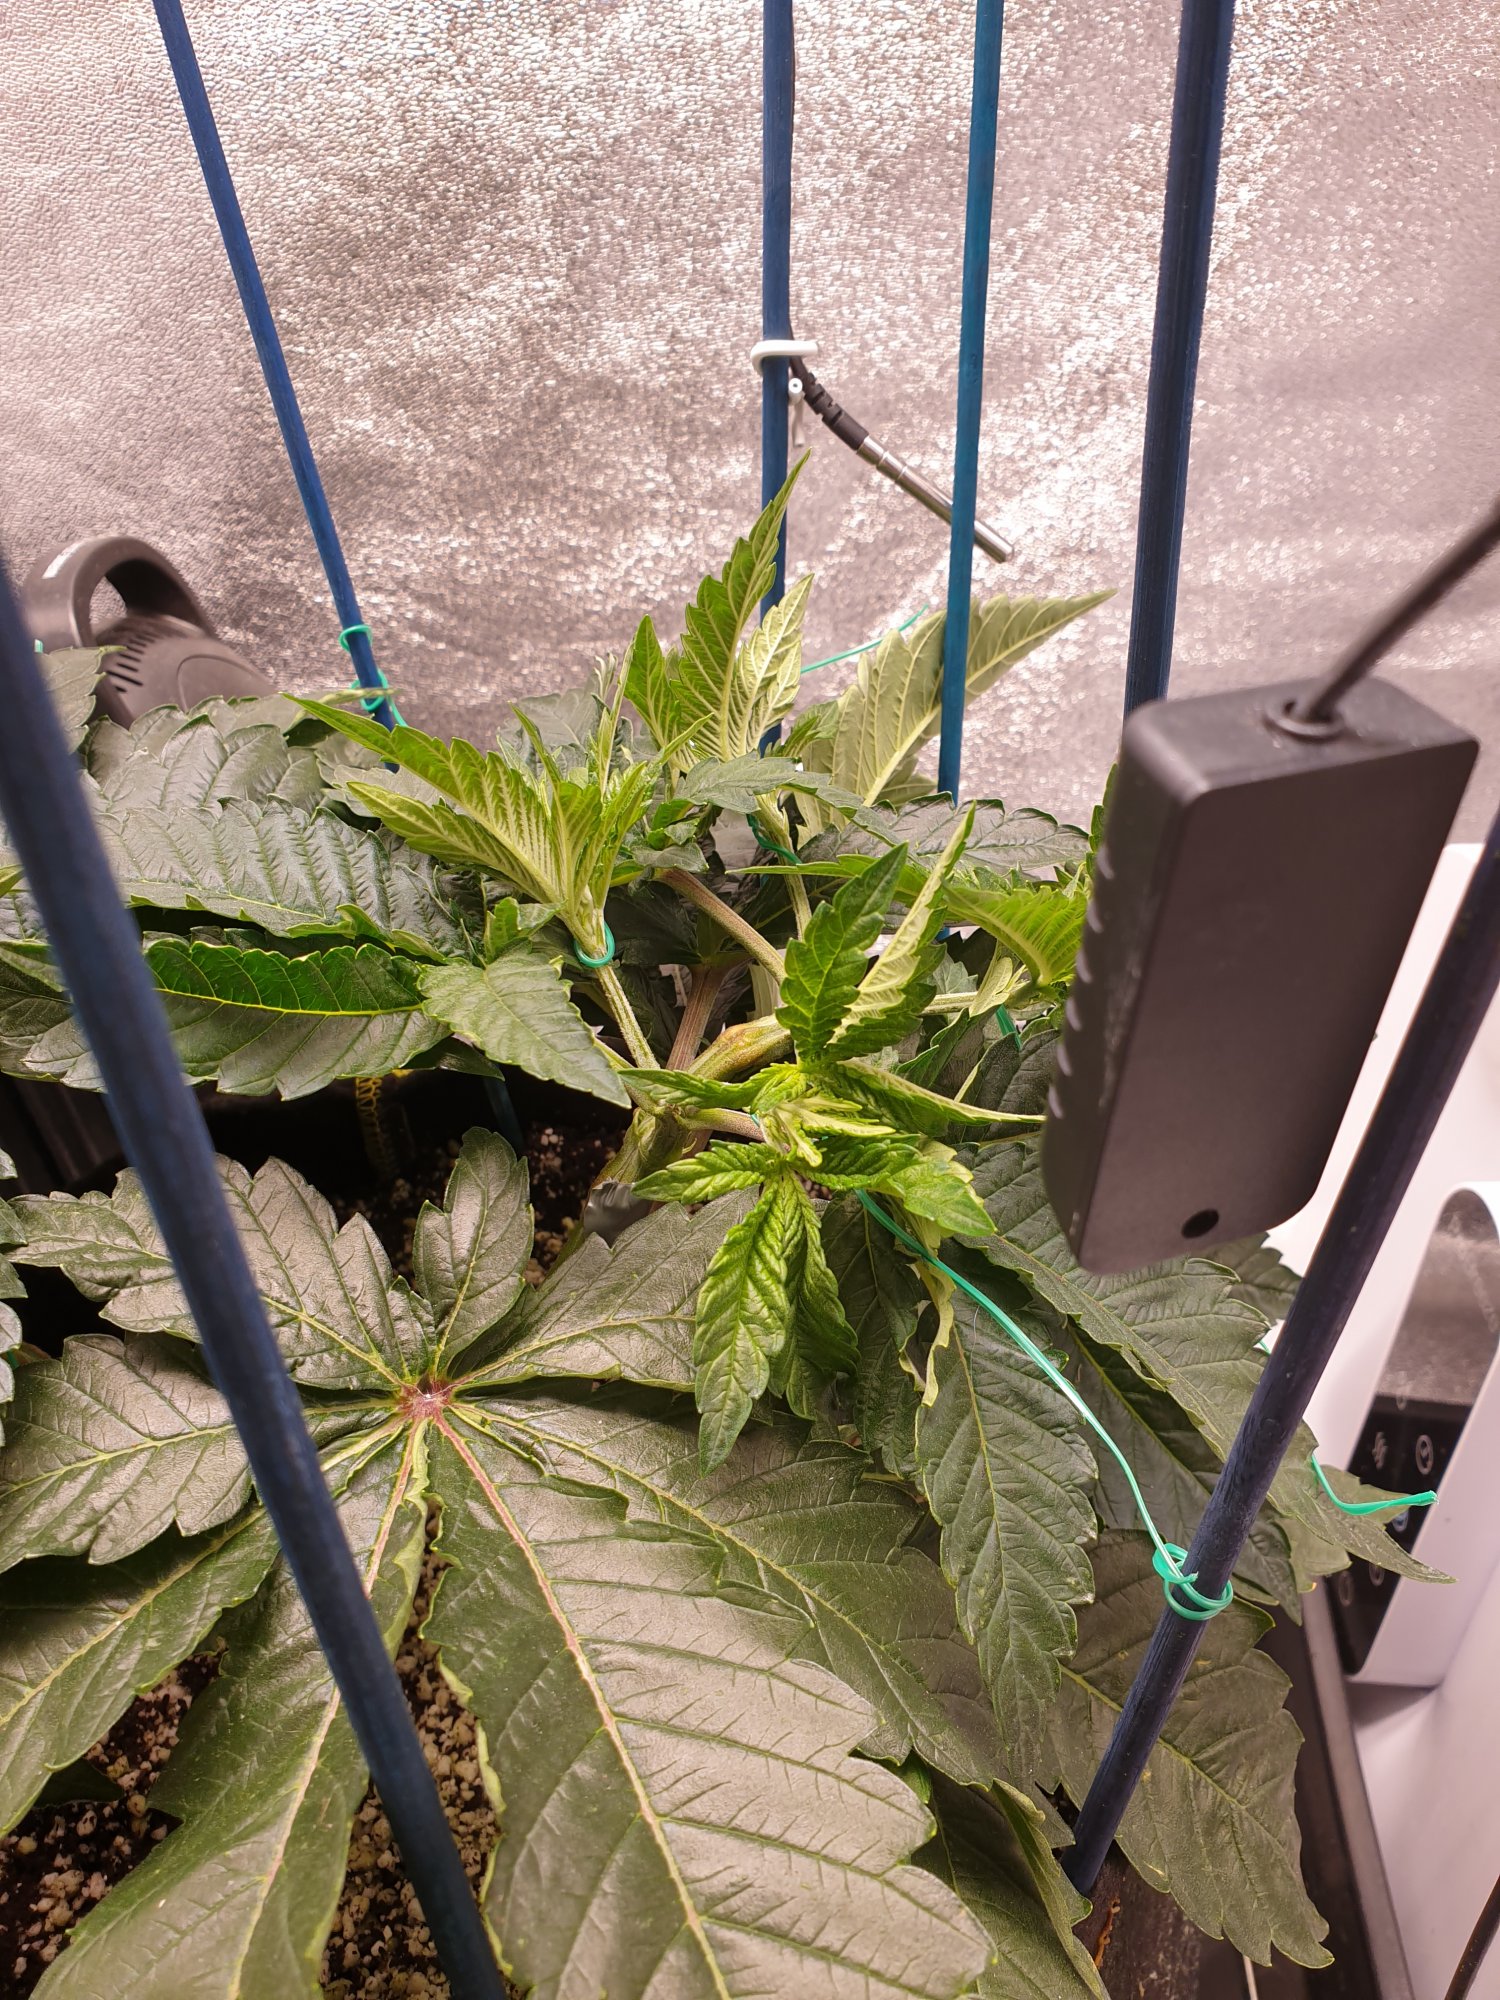 Help please new ish grower after some advice 2